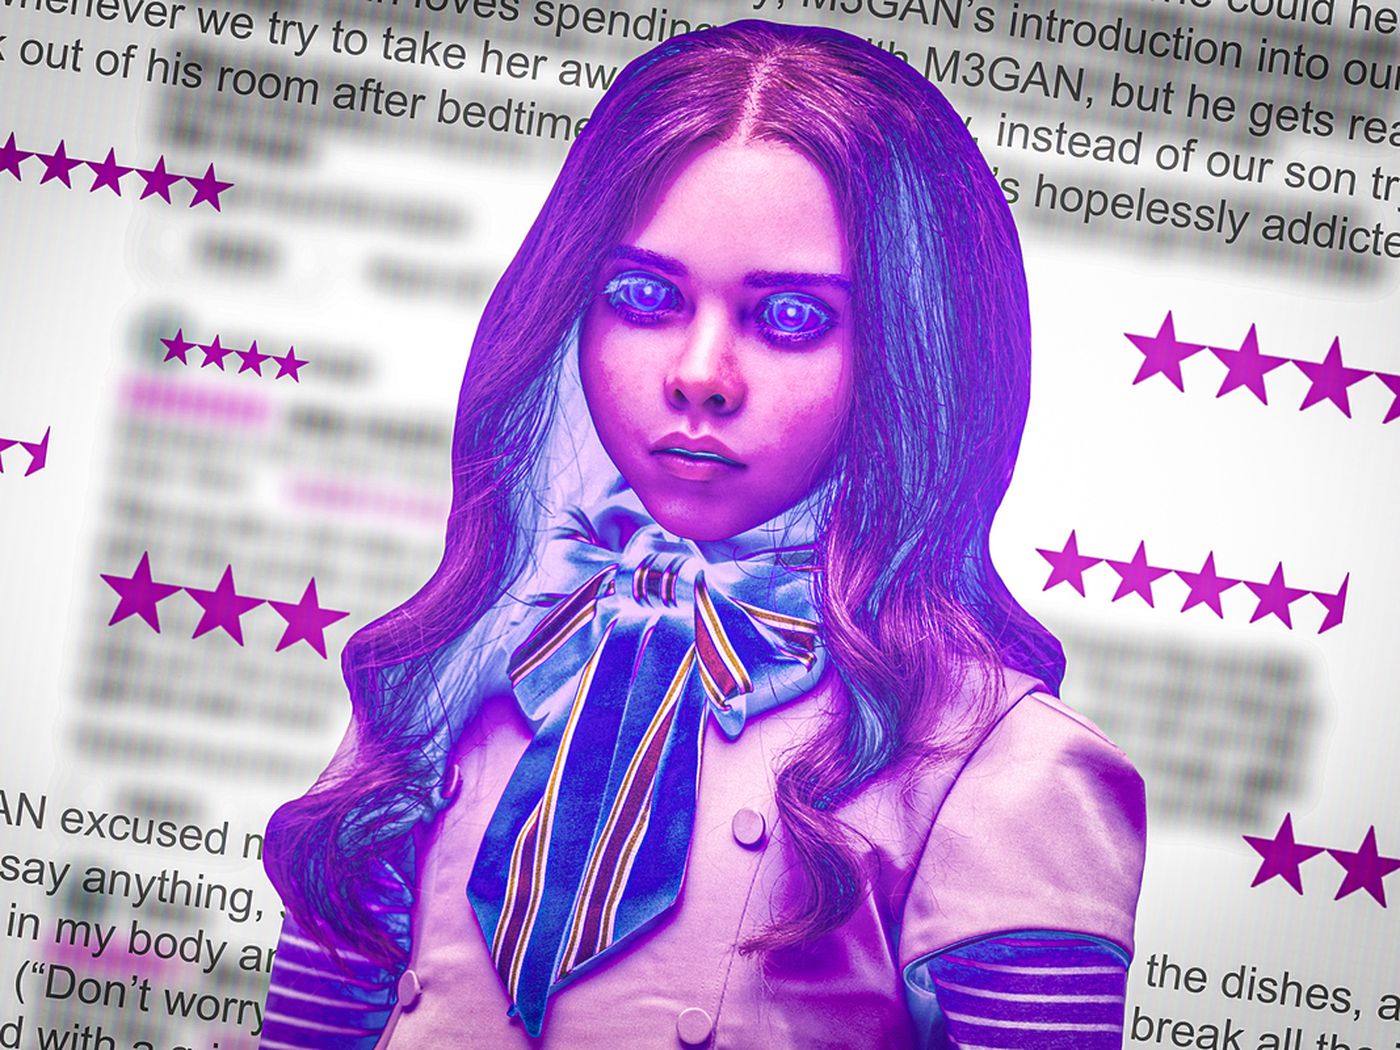 Real Reviews of the 'M3GAN' Doll From Parents Who Bought It